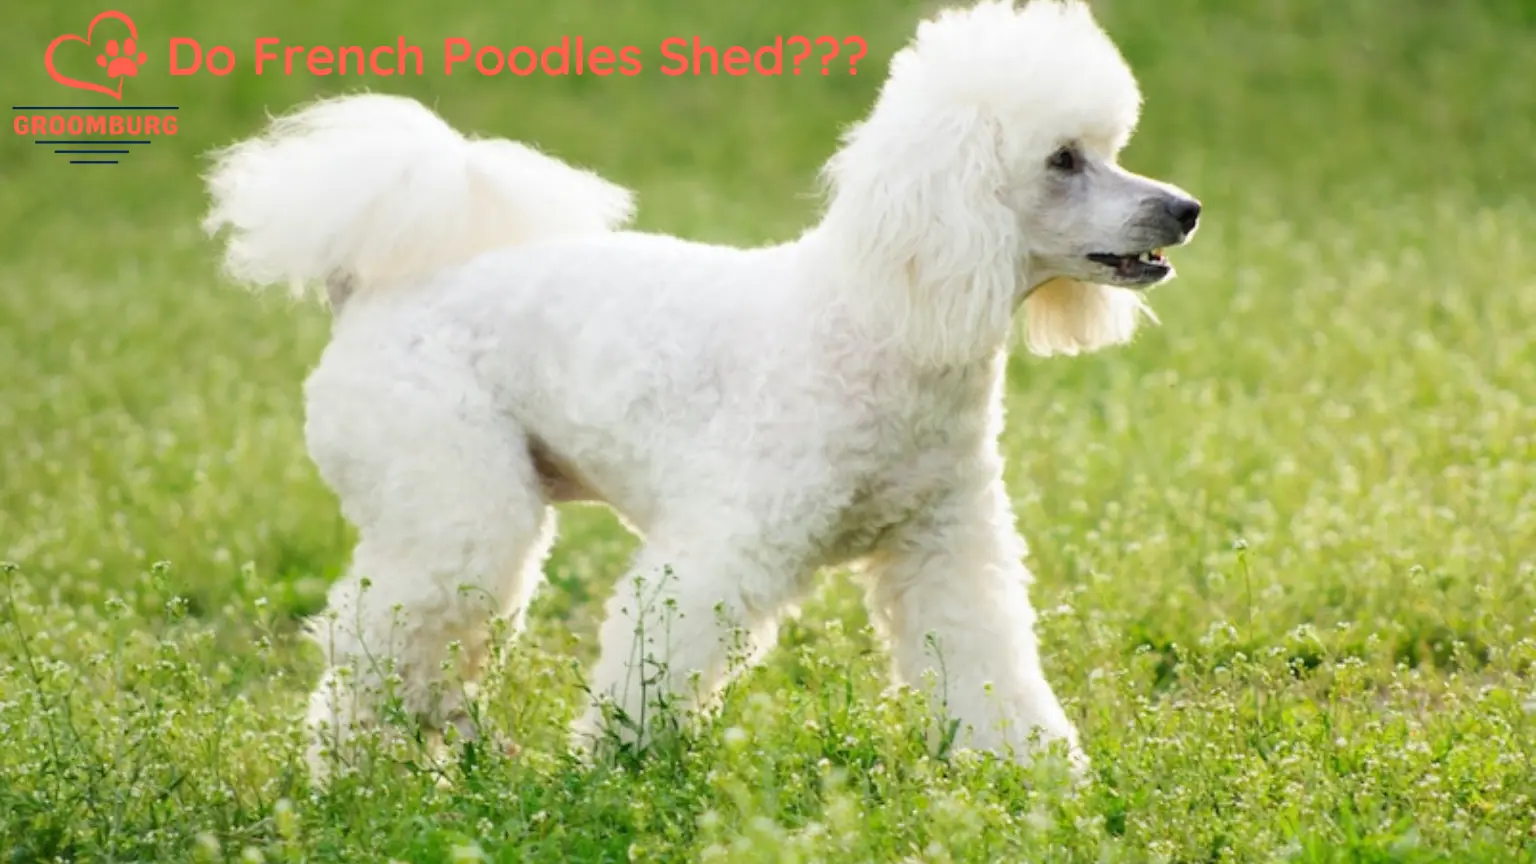 How Much Do French Poodles Shed? Coat Care Guide and Some Truths of Hair Loss